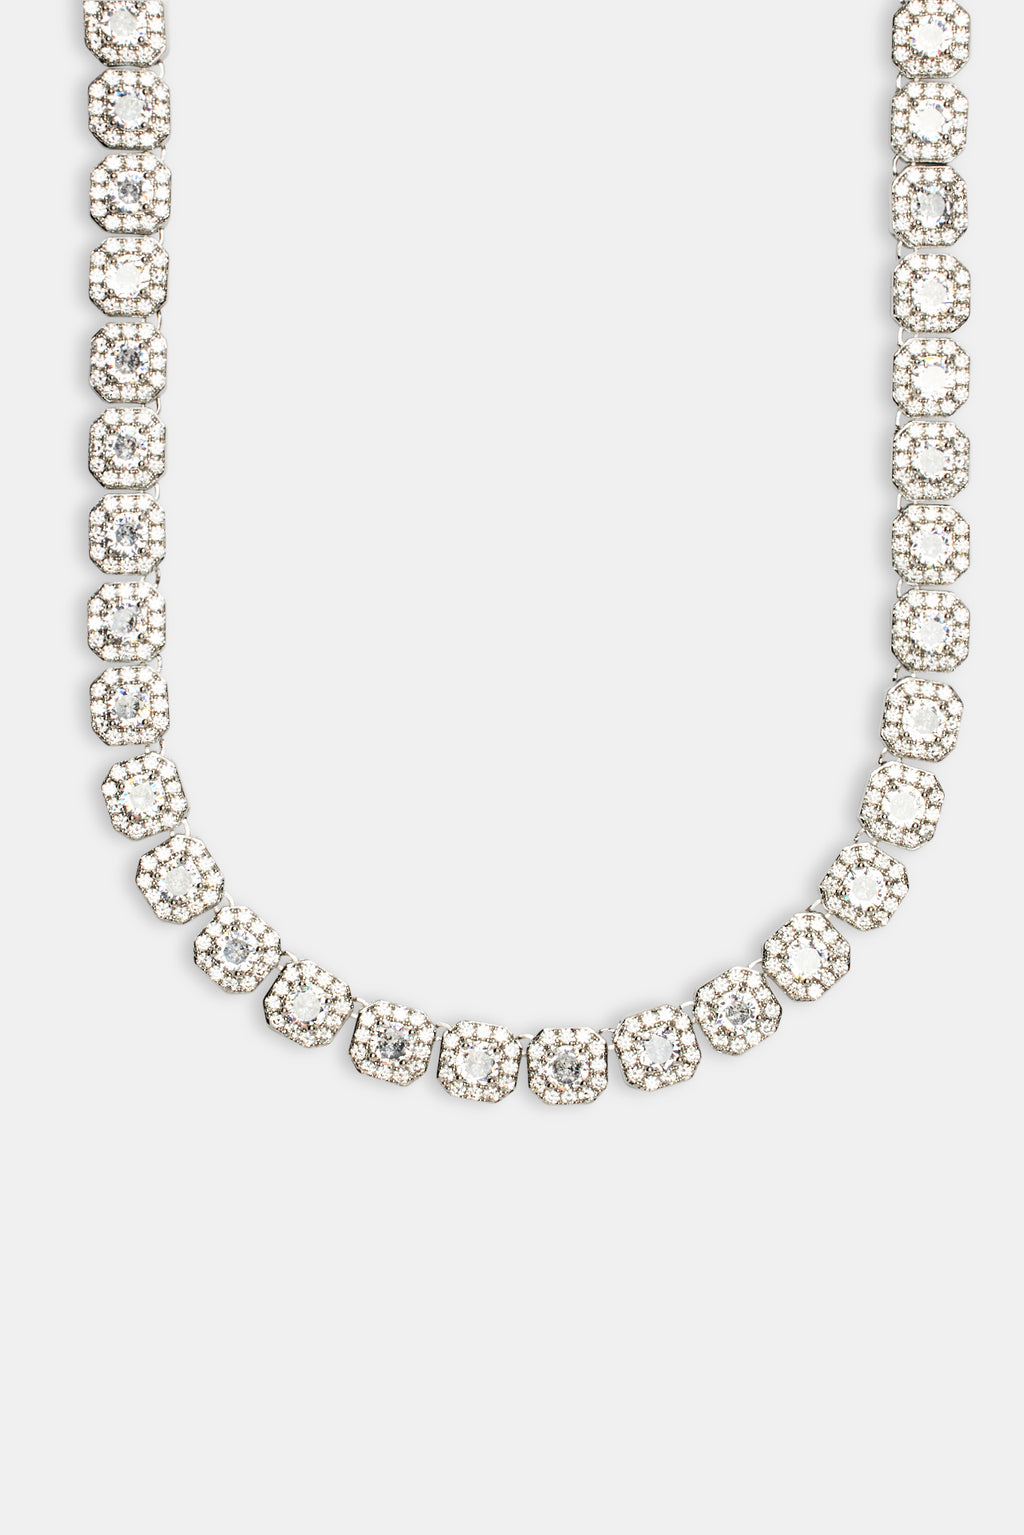 Bassano Jewelry | Round and Baguette Cluster Diamond Tennis Necklace